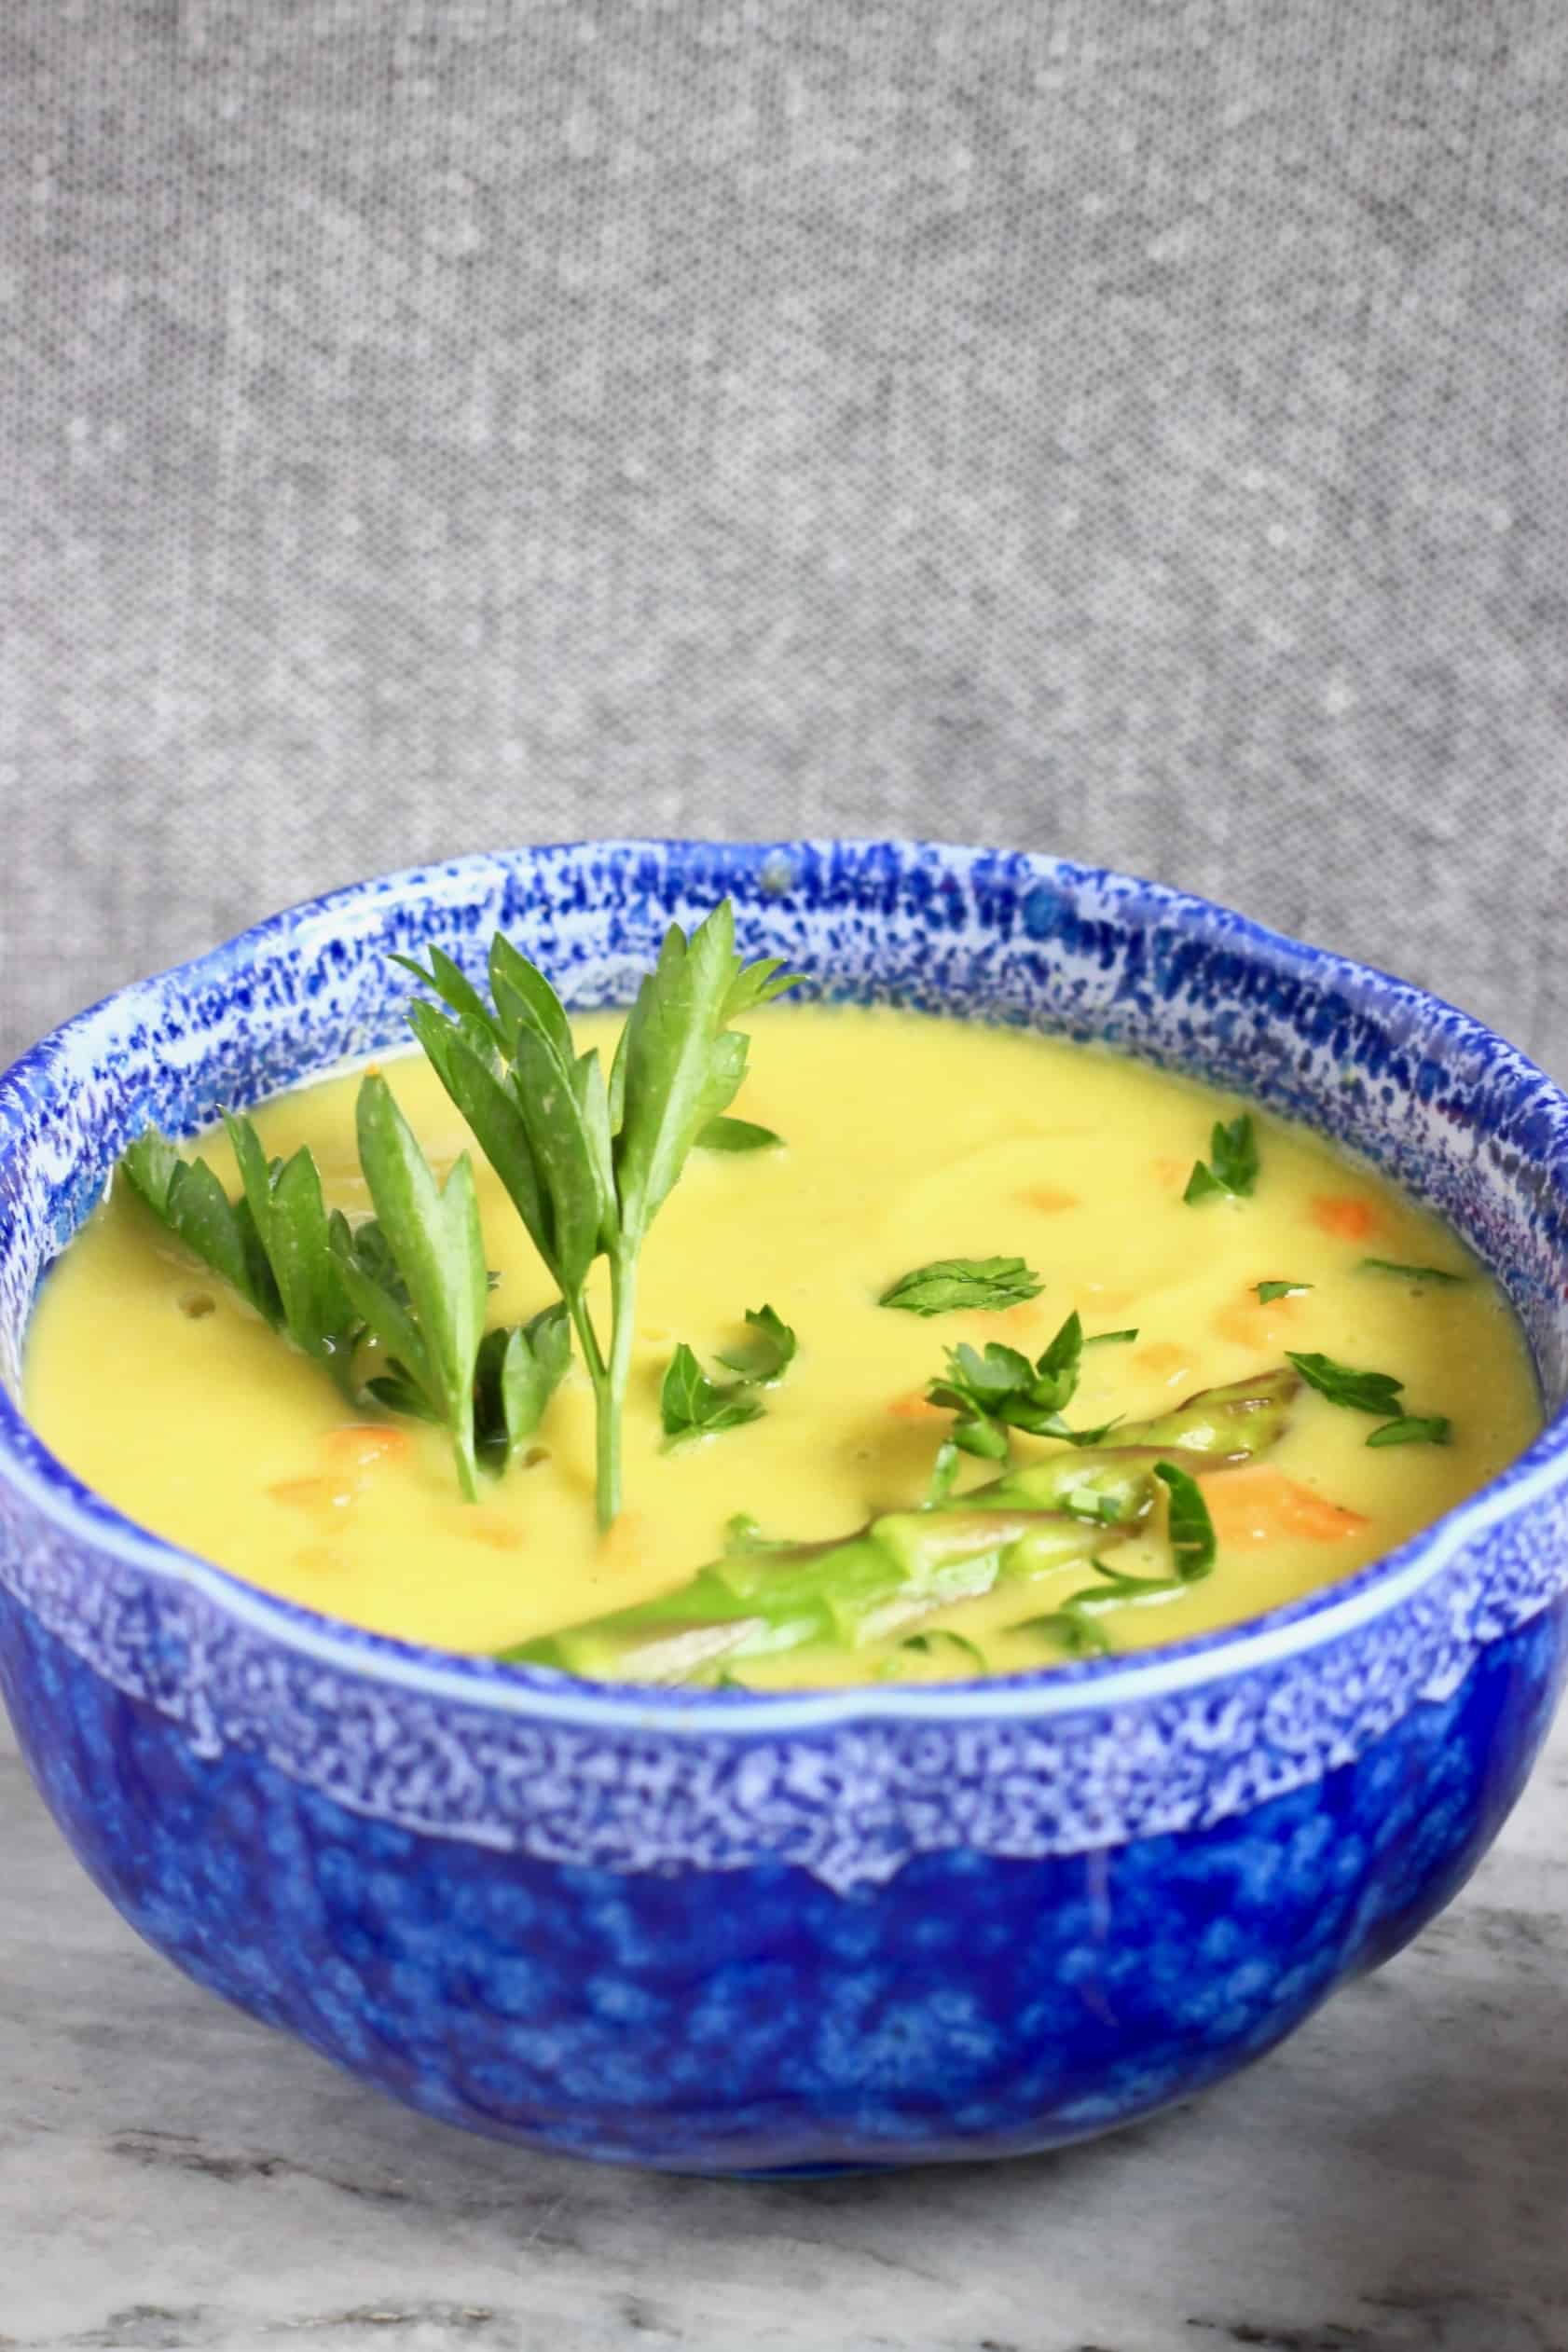 A dark blue bowl filled with light green asparagus soup decorated with green herbs against a grey background